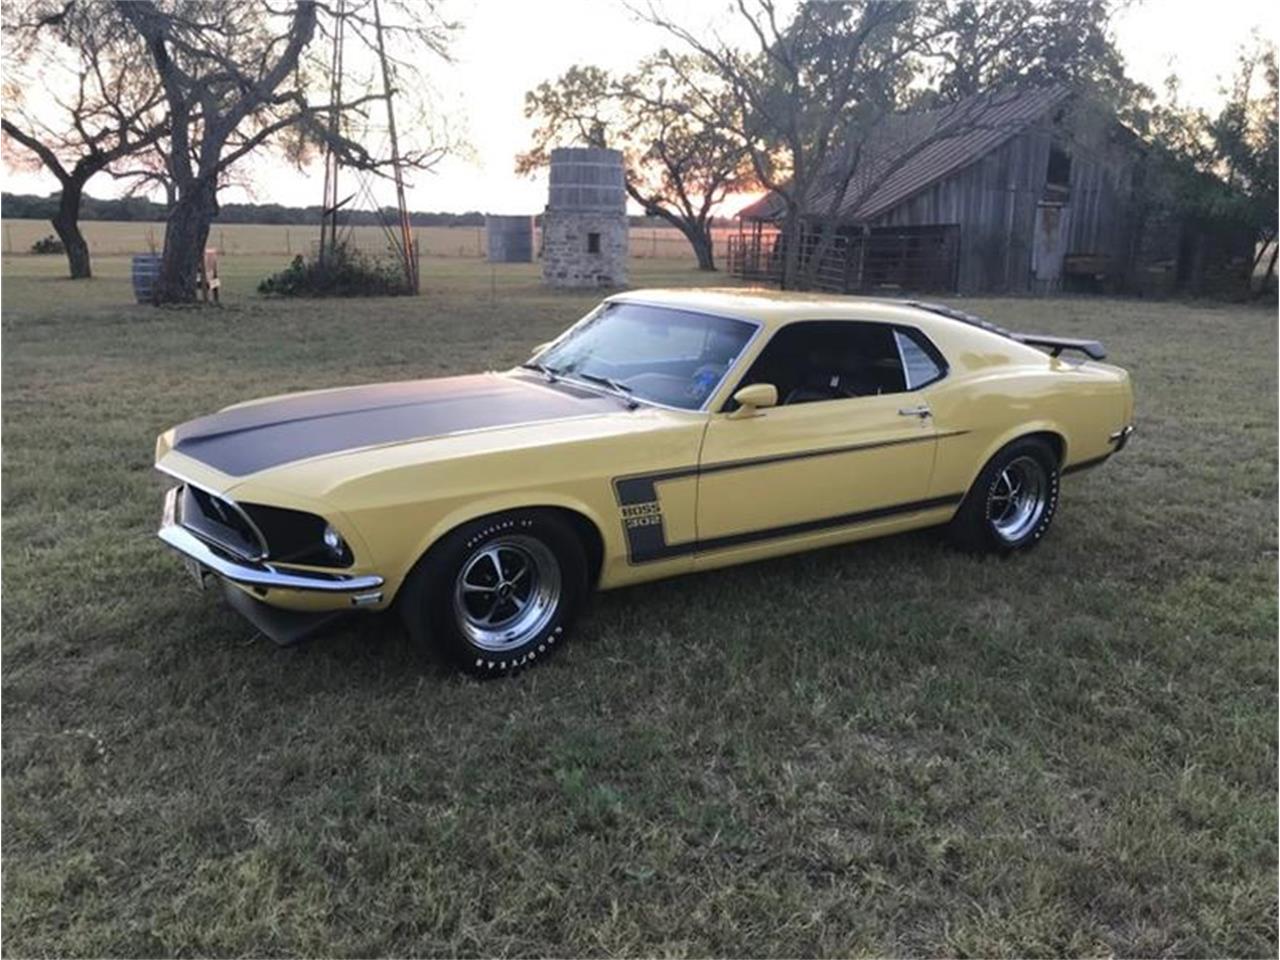 For Sale: 1969 Ford Mustang in Fredericksburg, Texas.